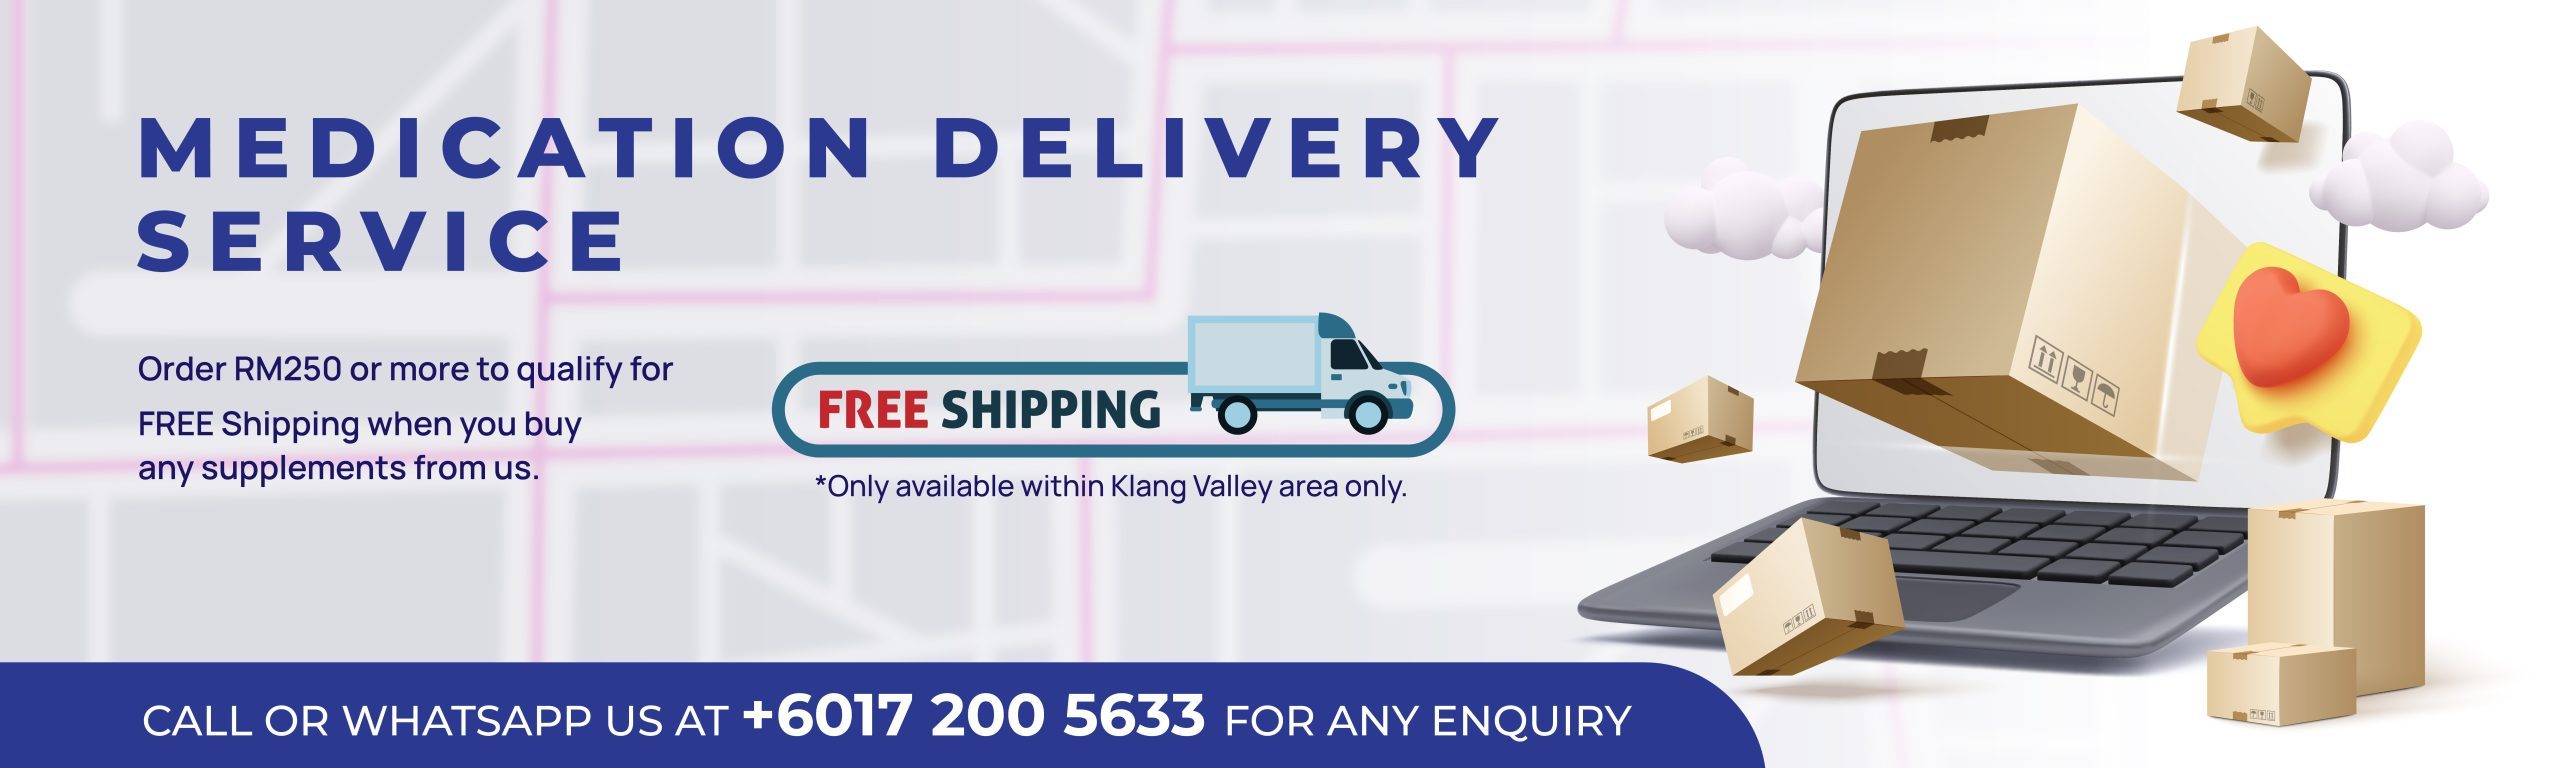 FREE DELIVERY-01